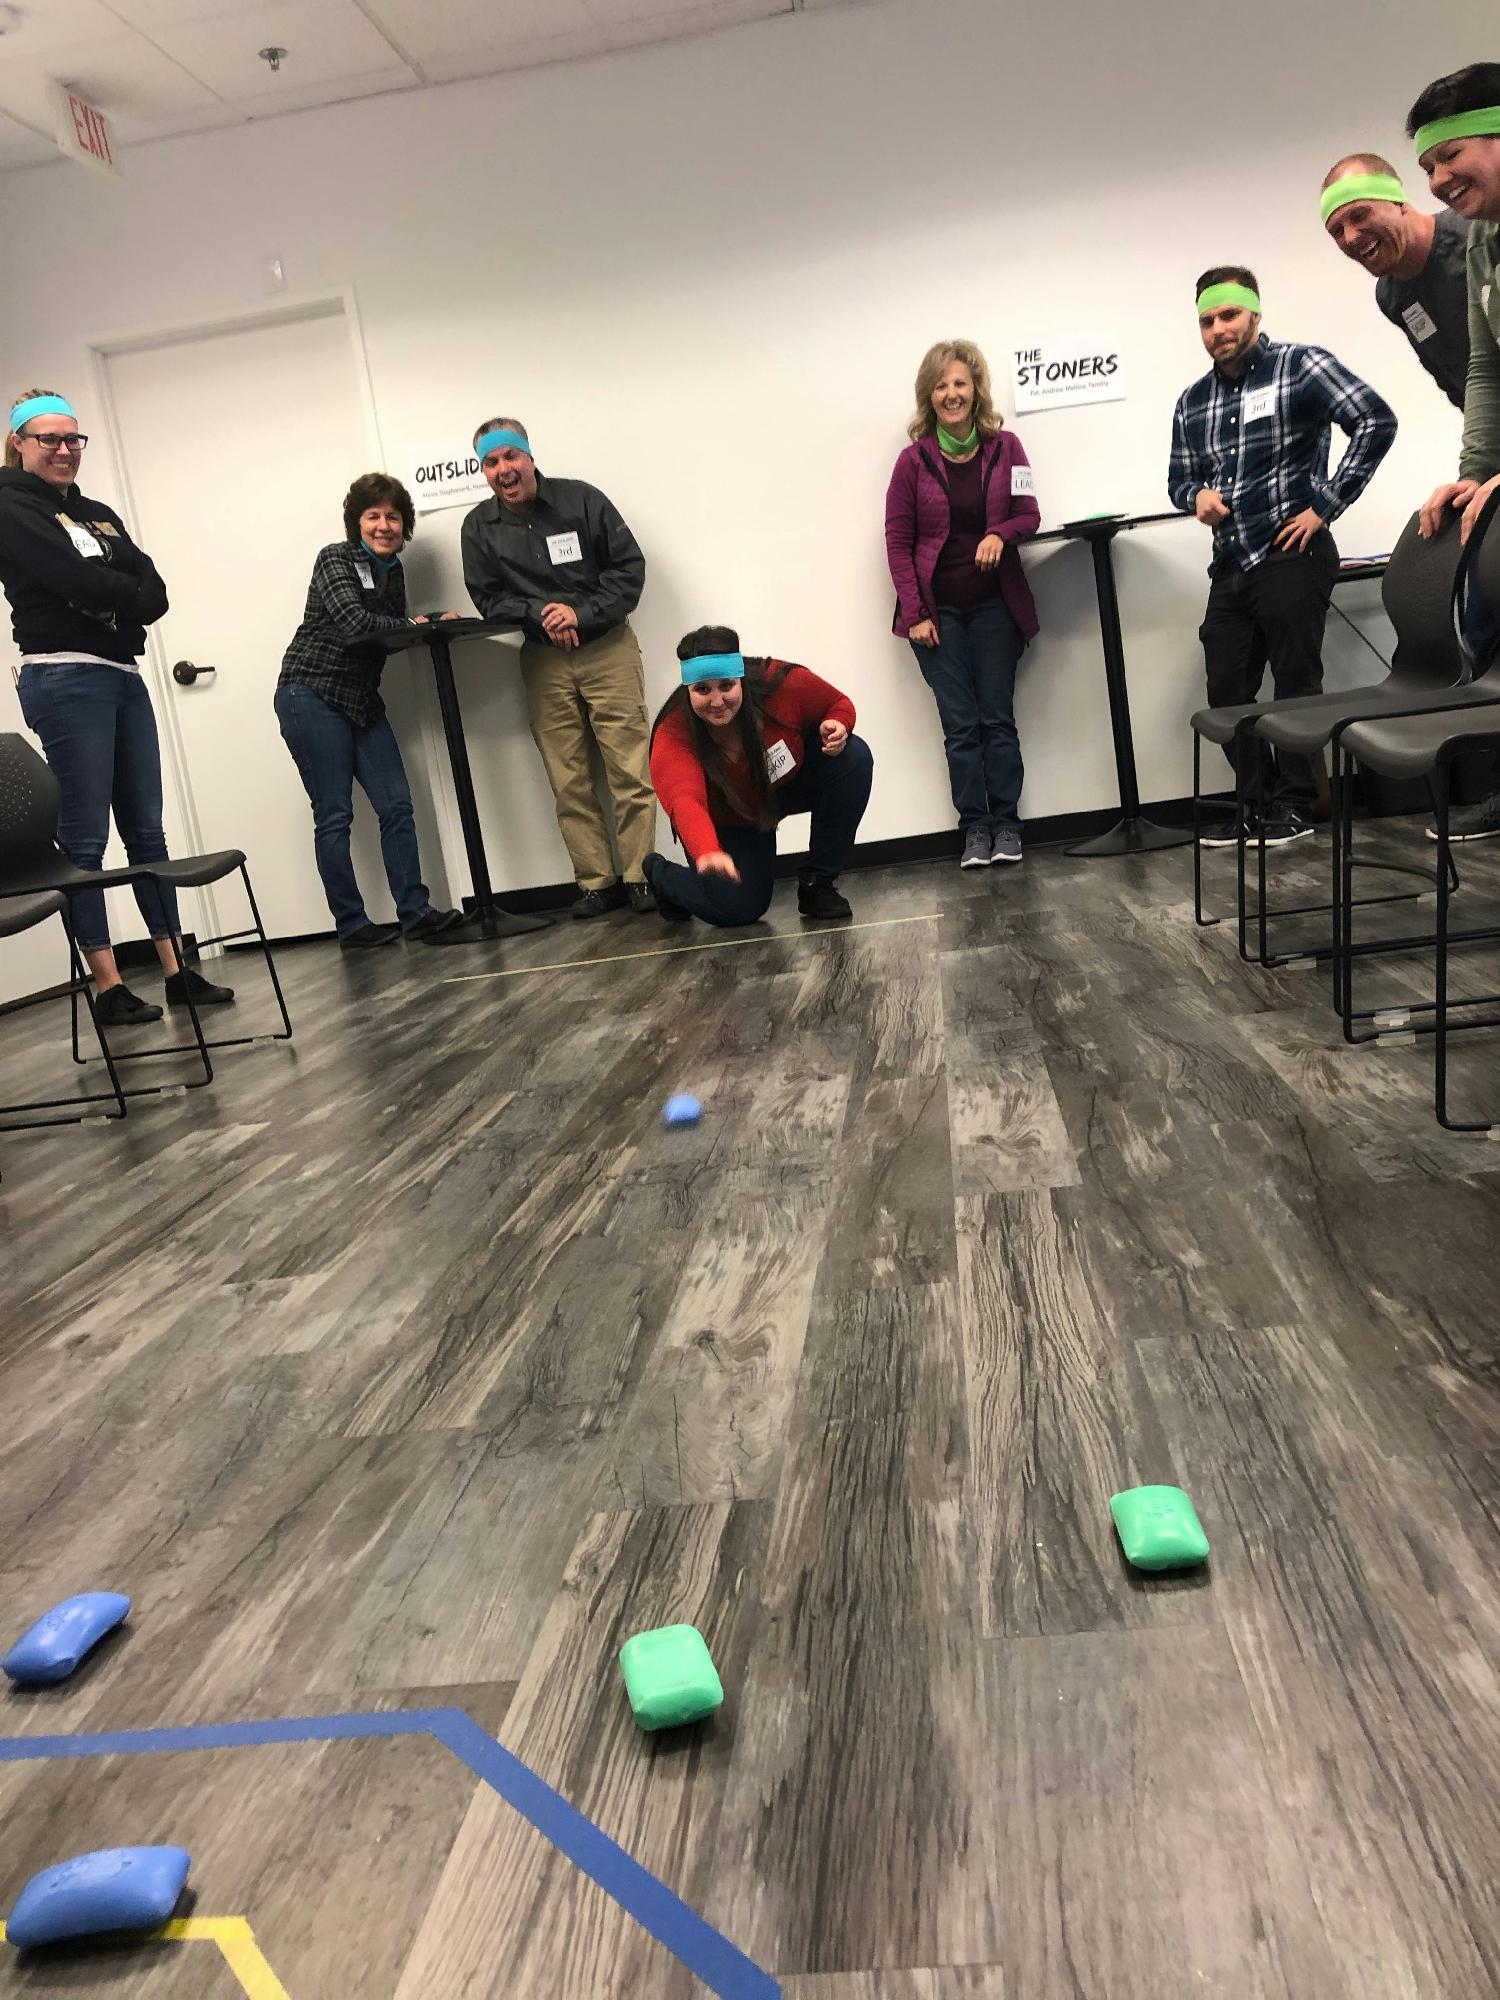 An Ignite Funding staff event doing our version of curling.